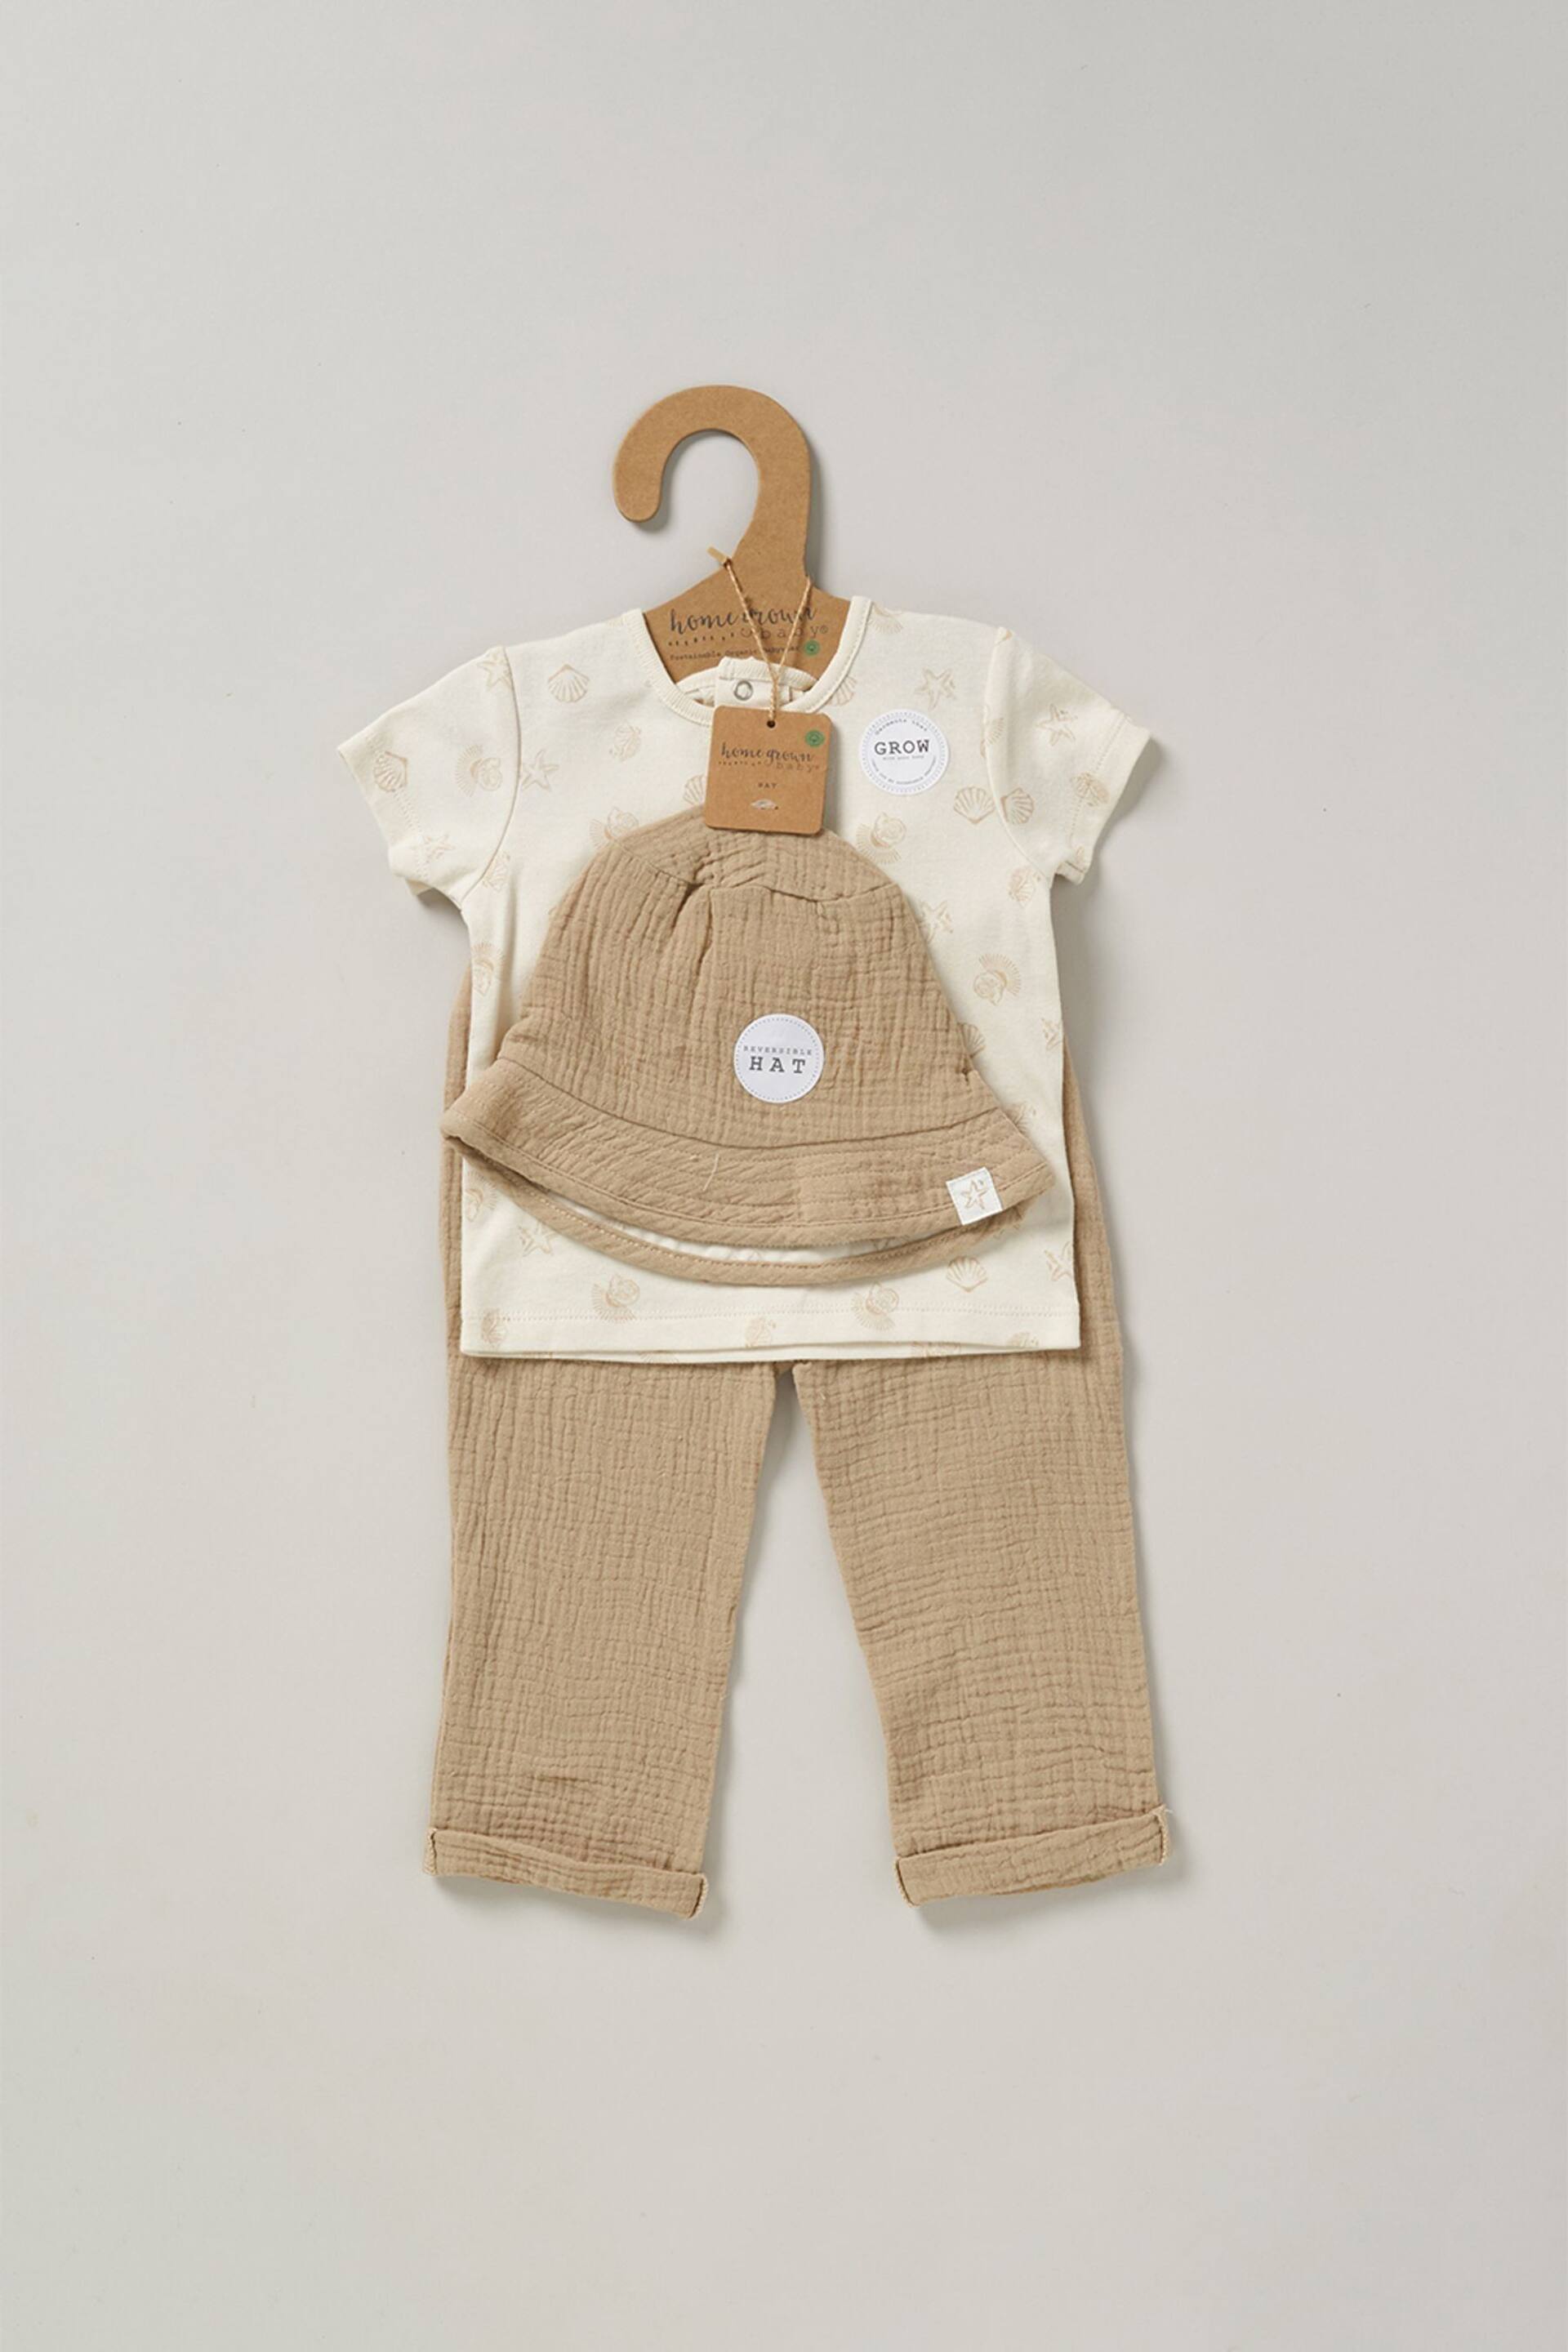 Homegrown Natural 3 Piece T-Shirt Trousers And Reversible Hat Outfit Set - Image 2 of 5